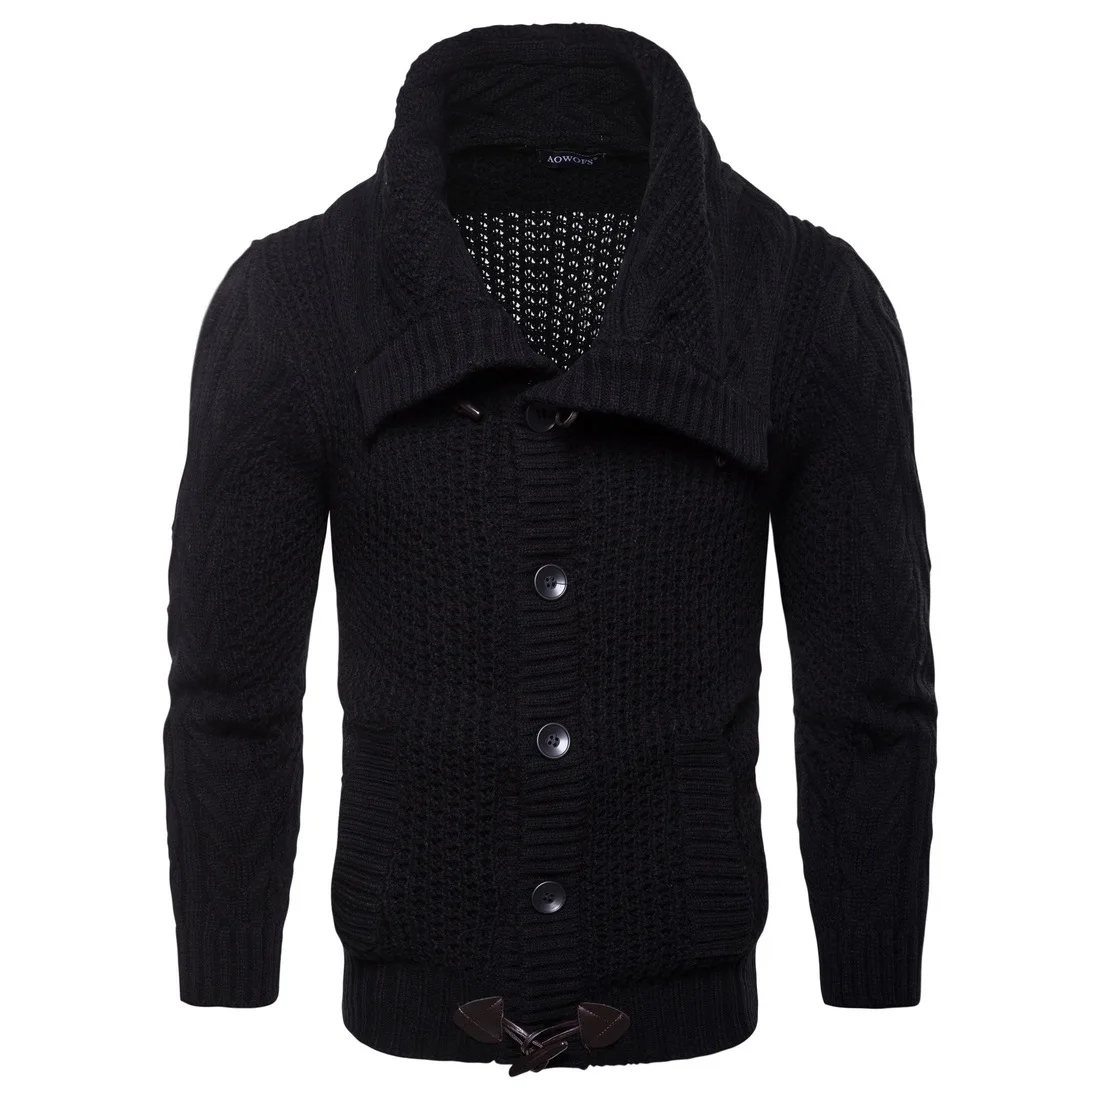 New Black Men's Sweaters Autumn Winter Warm Cashmere Wool Cardigan Sweaters Man Casual Male Sweater  Clothes